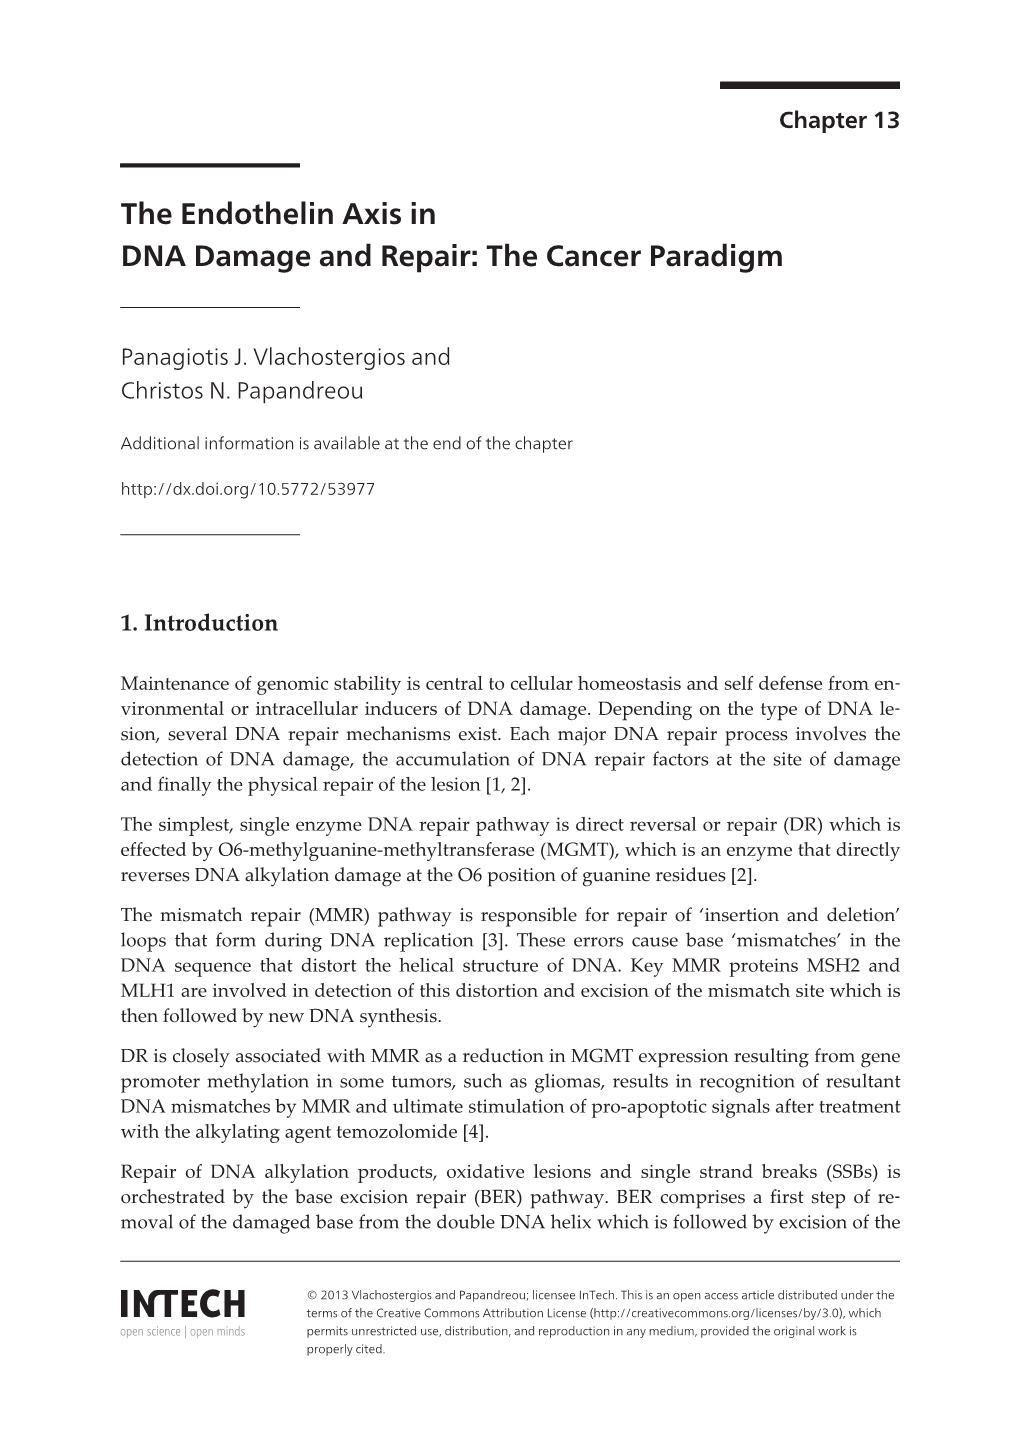 The Endothelin Axis in DNA Damage and Repair: the Cancer Paradigm